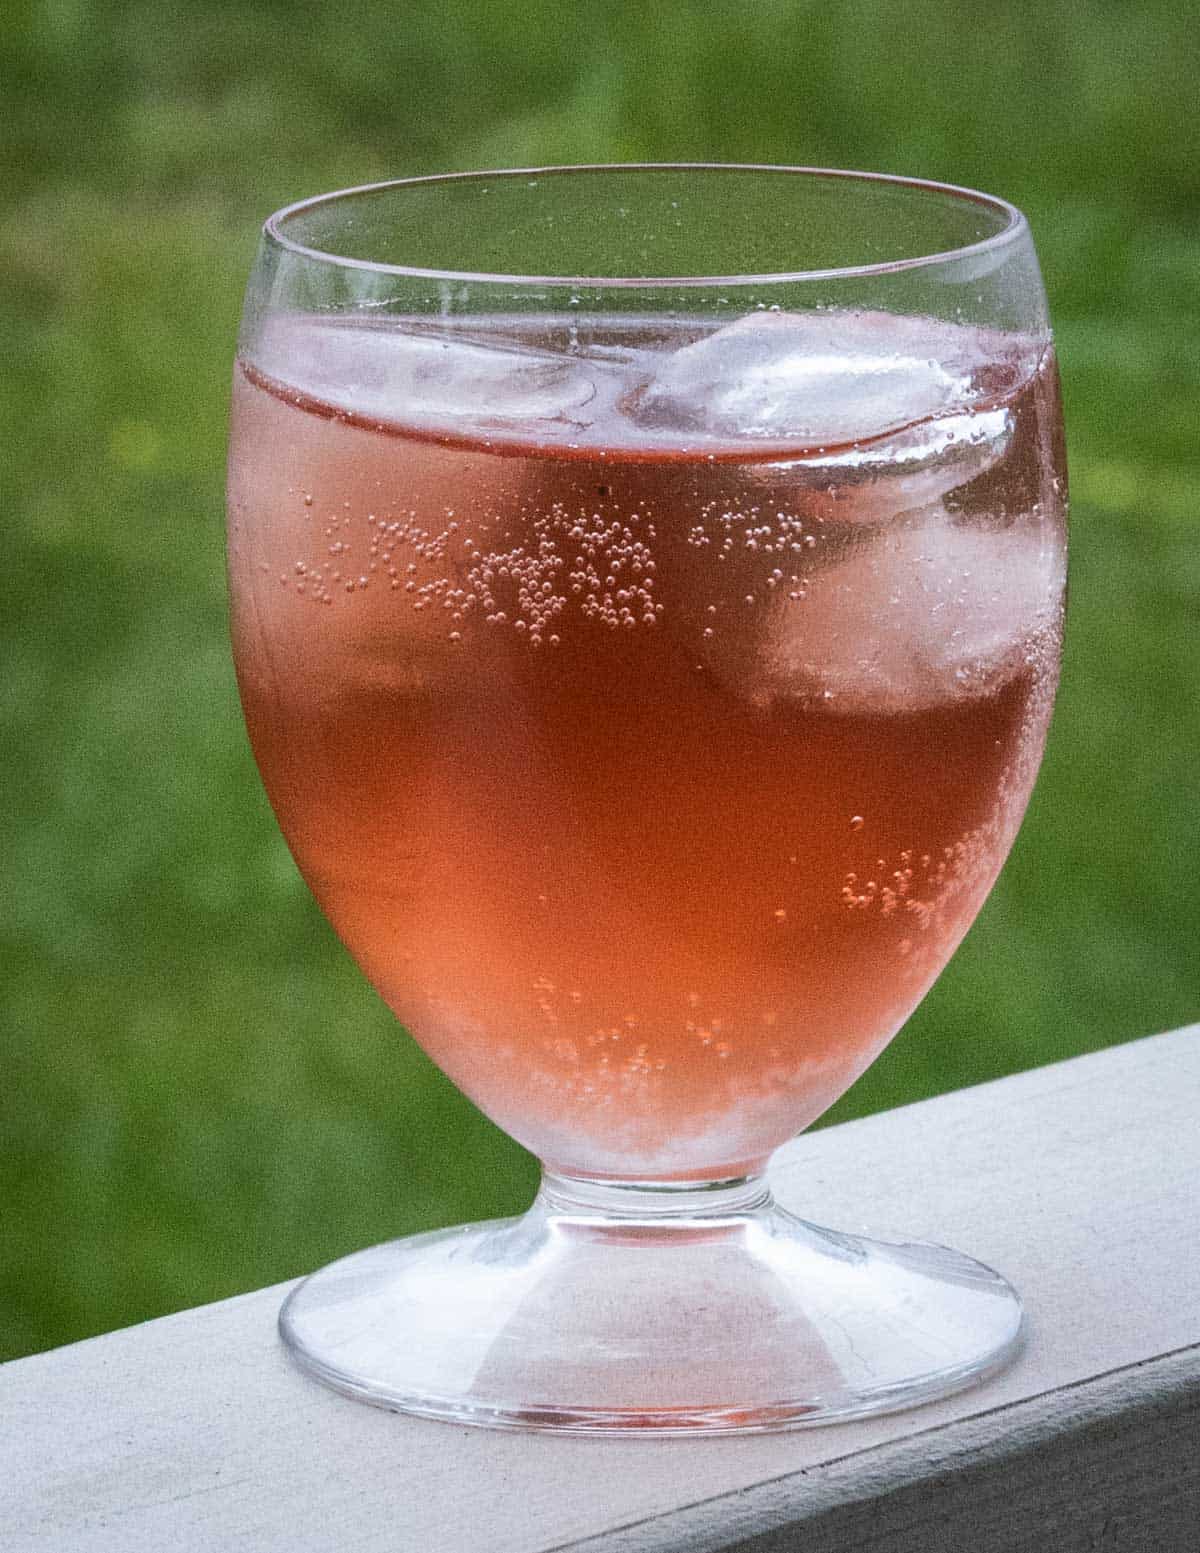 Chokecherry syrup cocktail with chokecherry pit liqueur in a glass with ice.